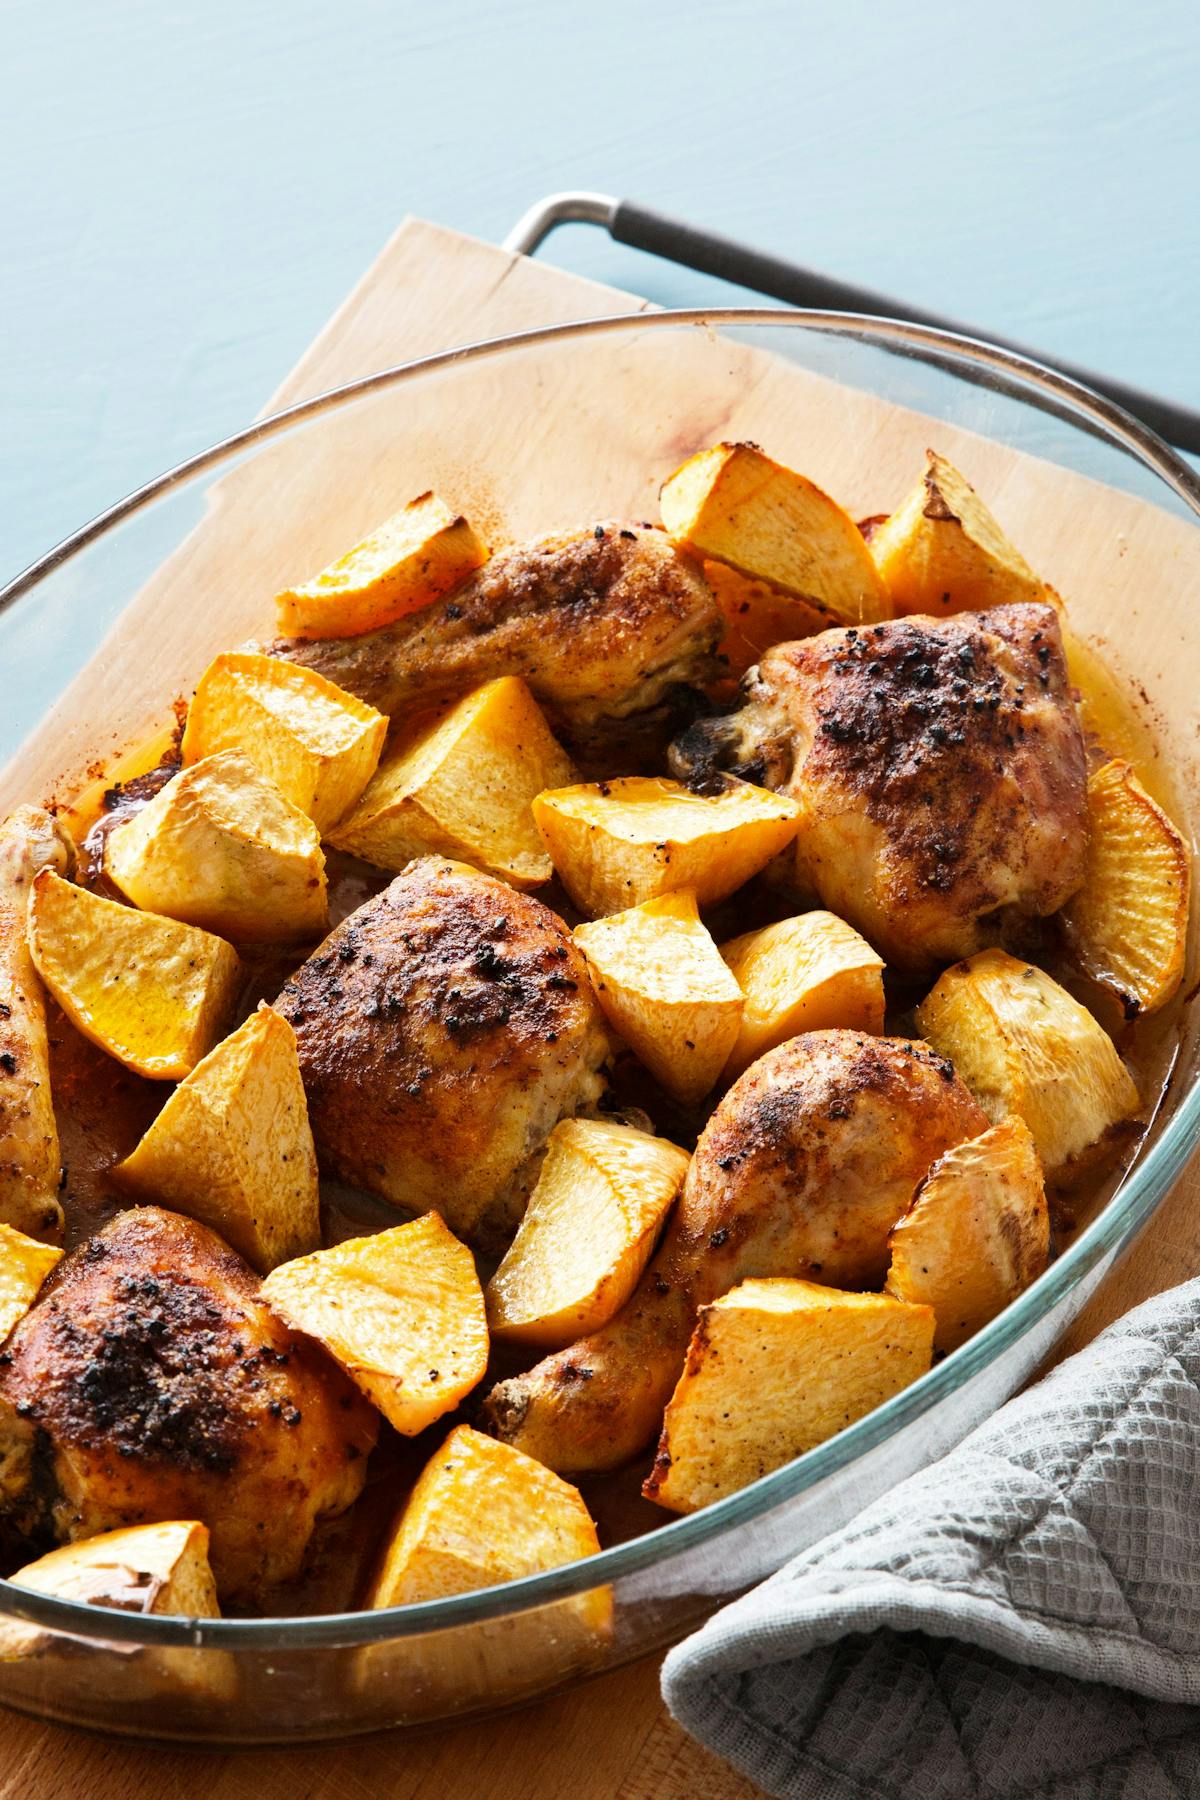 Oven-baked paprika chicken with rutabaga